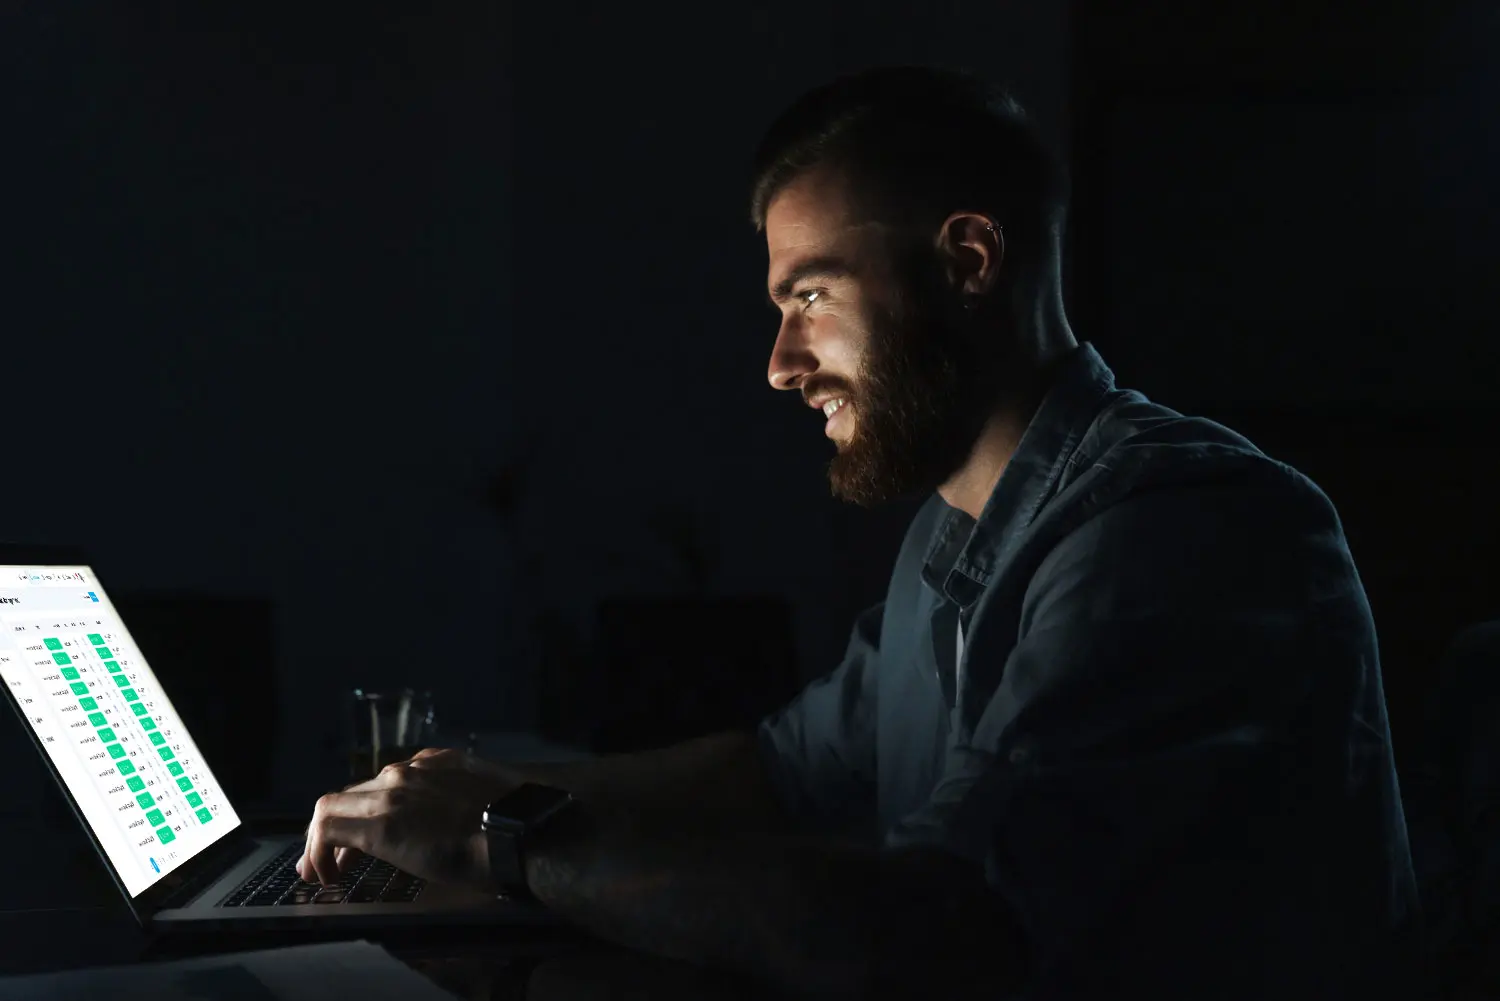 accounts-page-confident-smiling-young-man-working-laptop-computer-while-sitting-table-indoors-night